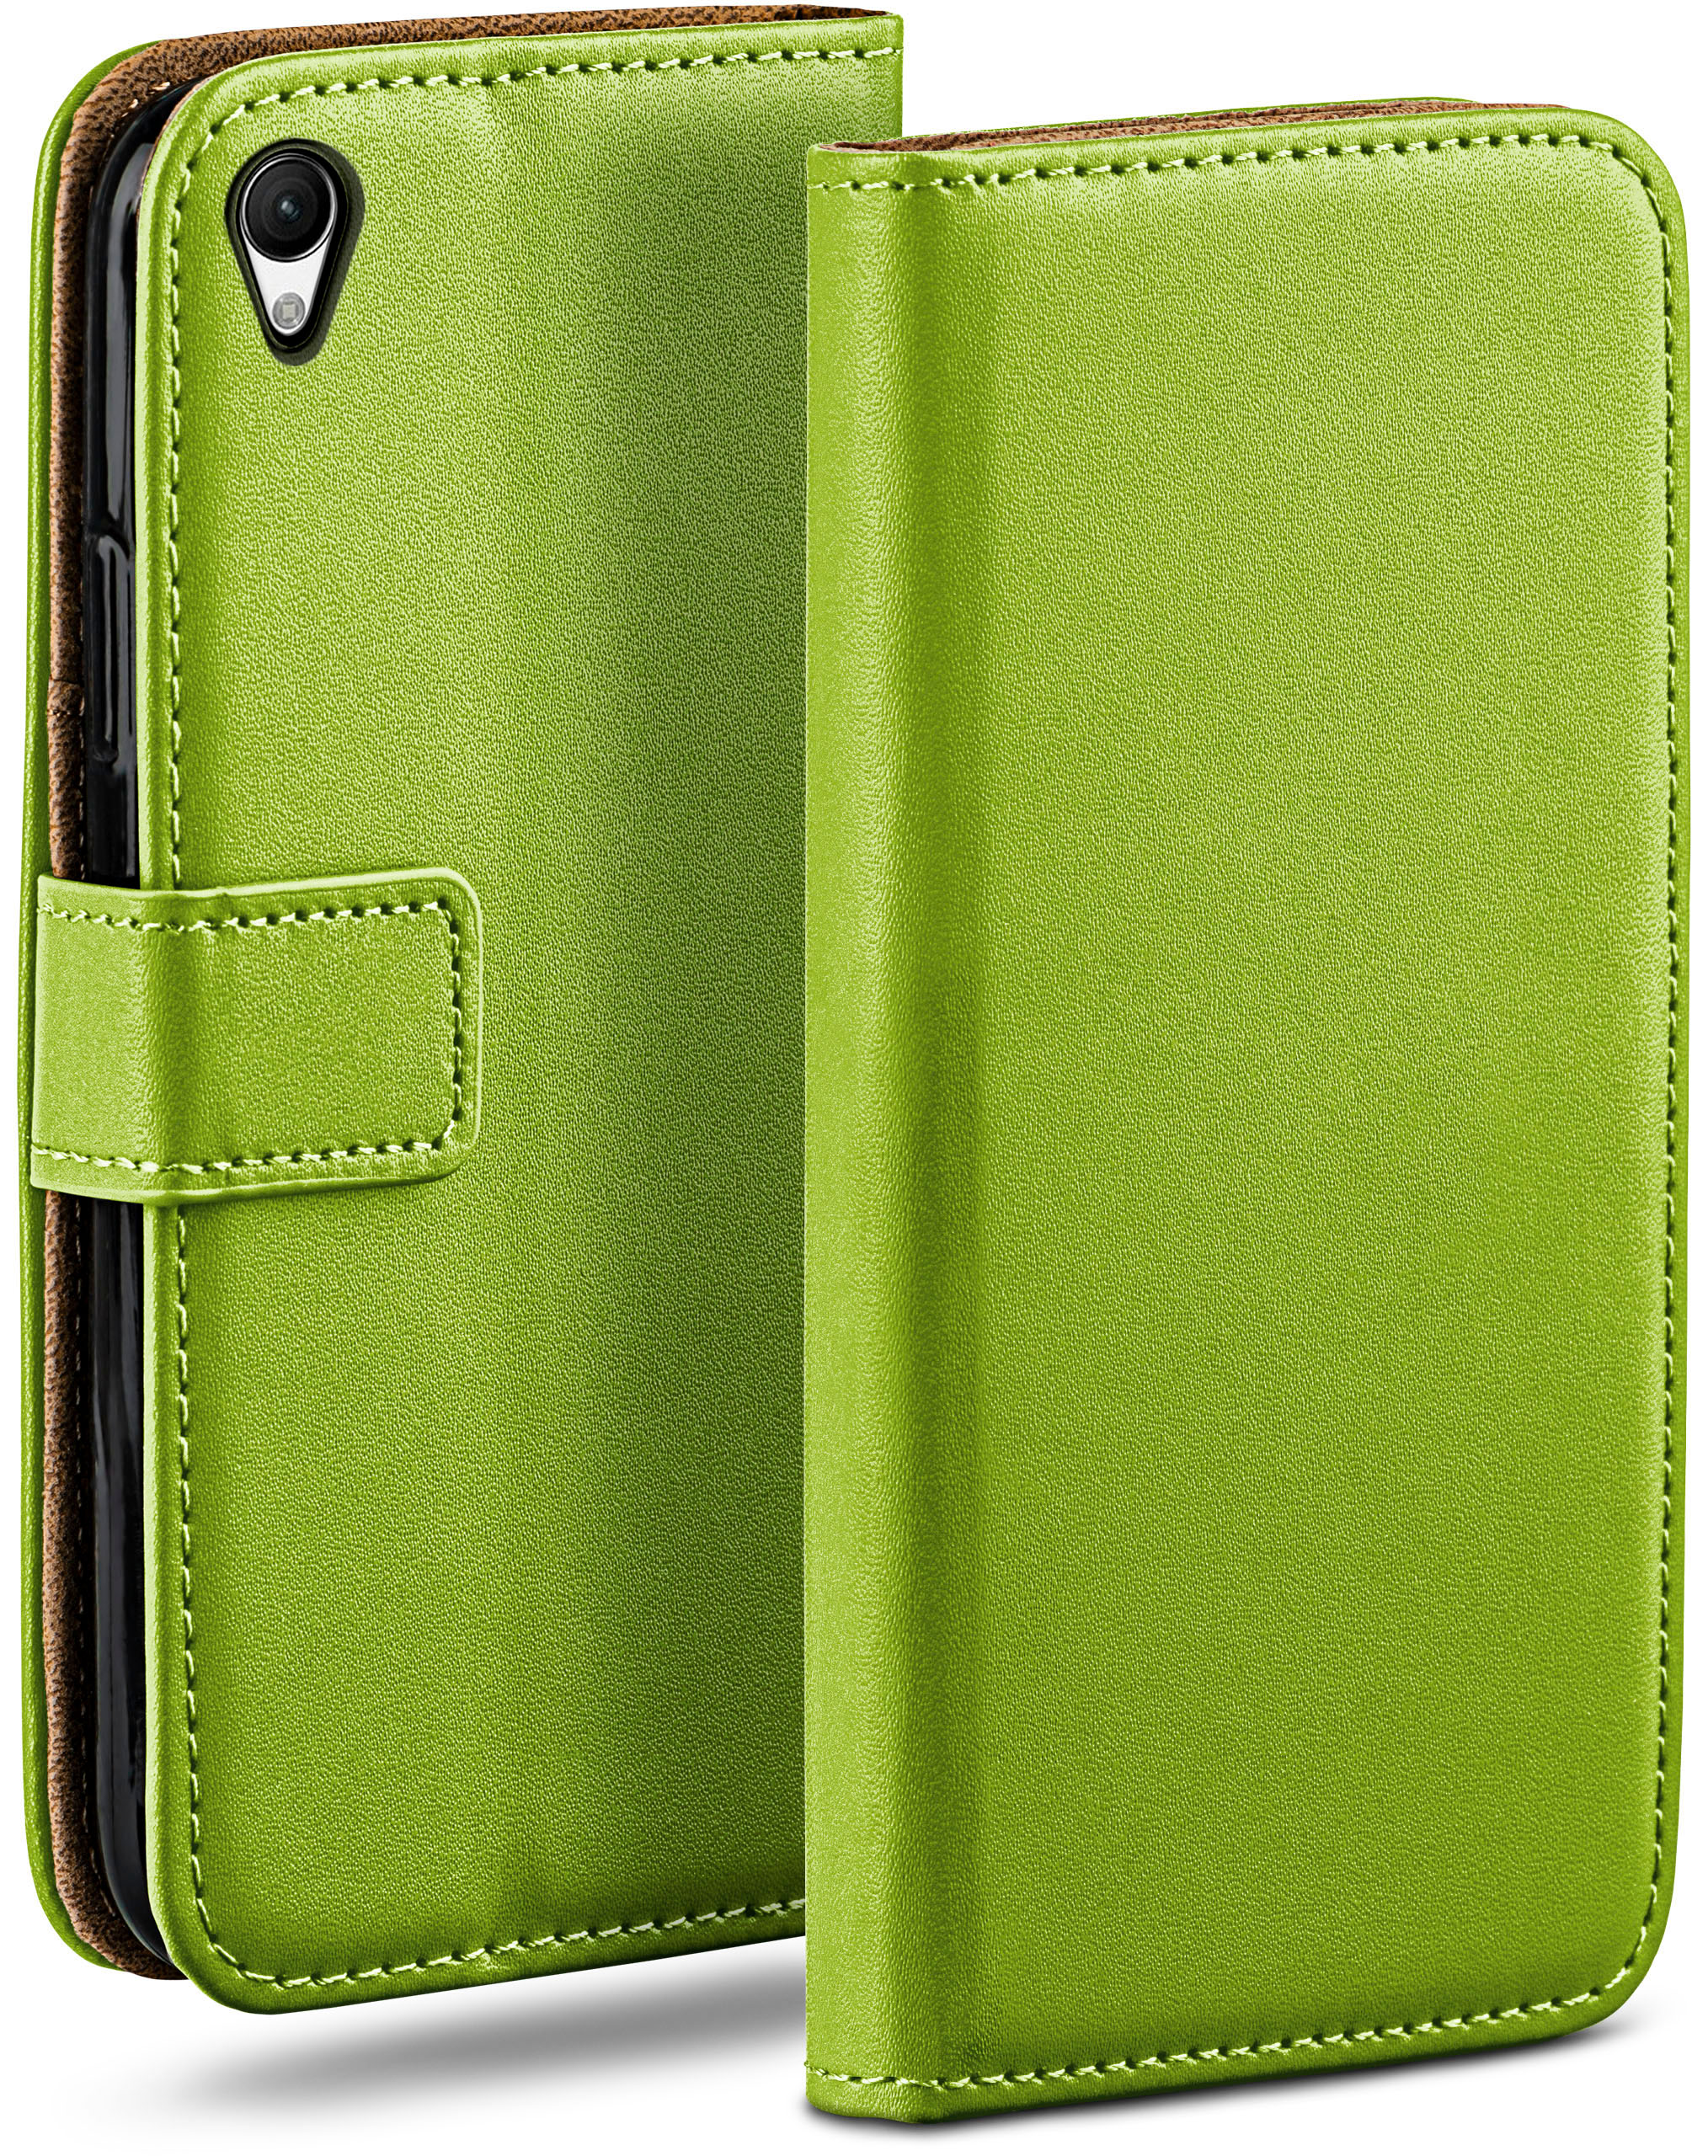 Book Sony, Lime-Green Z3, Bookcover, MOEX Case, Xperia